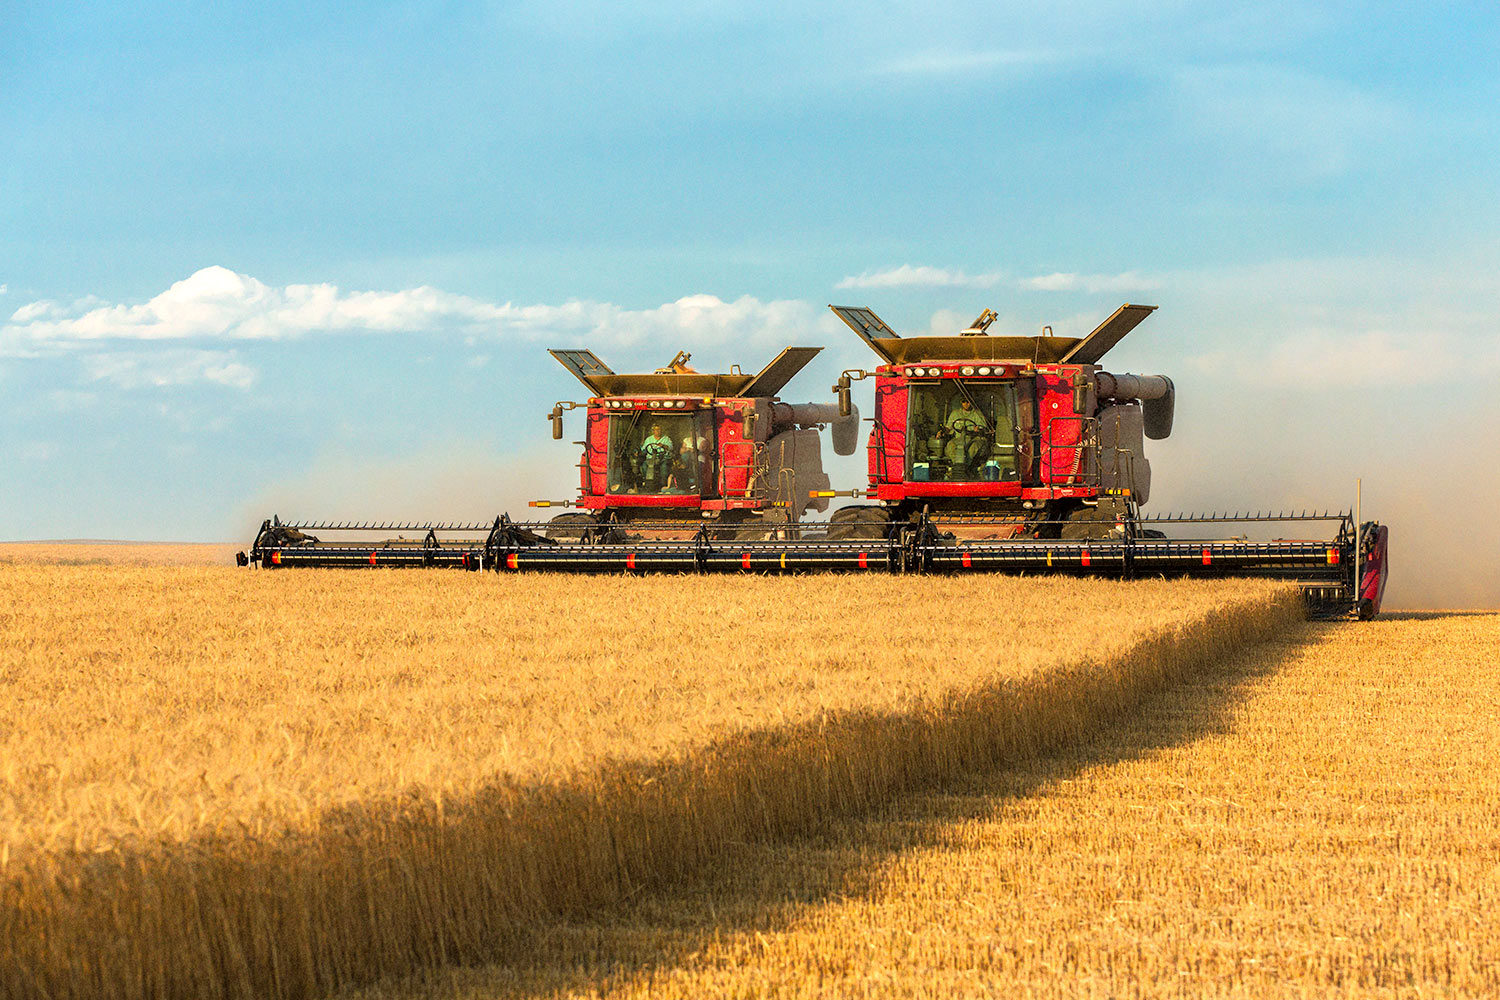 Two large combines working side-by-side to cut a large field of ripe wheat north of Havre, Montana.&nbsp;→ Buy a Print&nbsp;or License Photo